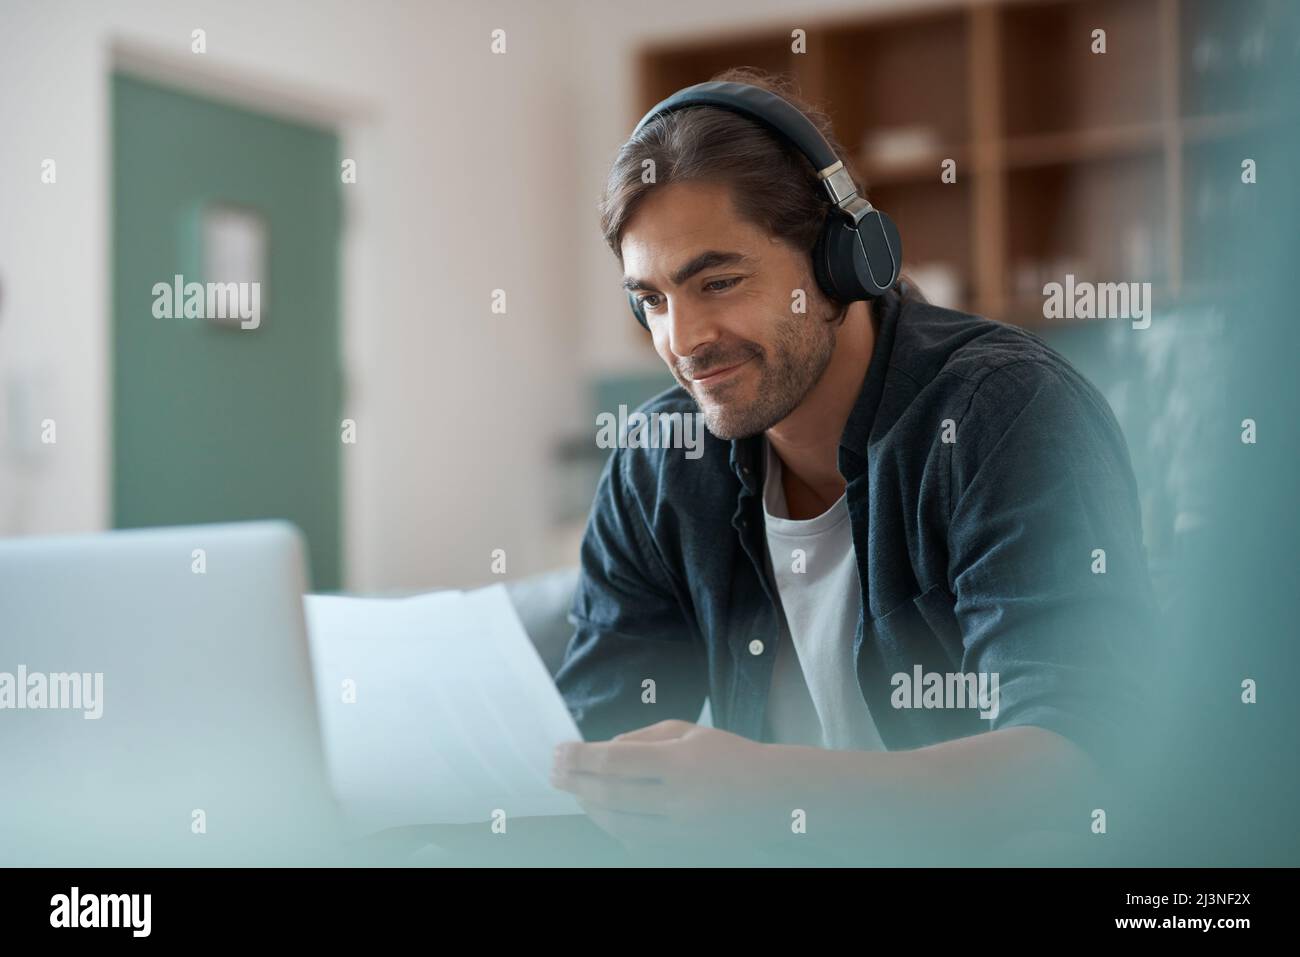 Seeing my ideas on paper. Shot of a young man doing paperwork while using a laptop at home. Stock Photo